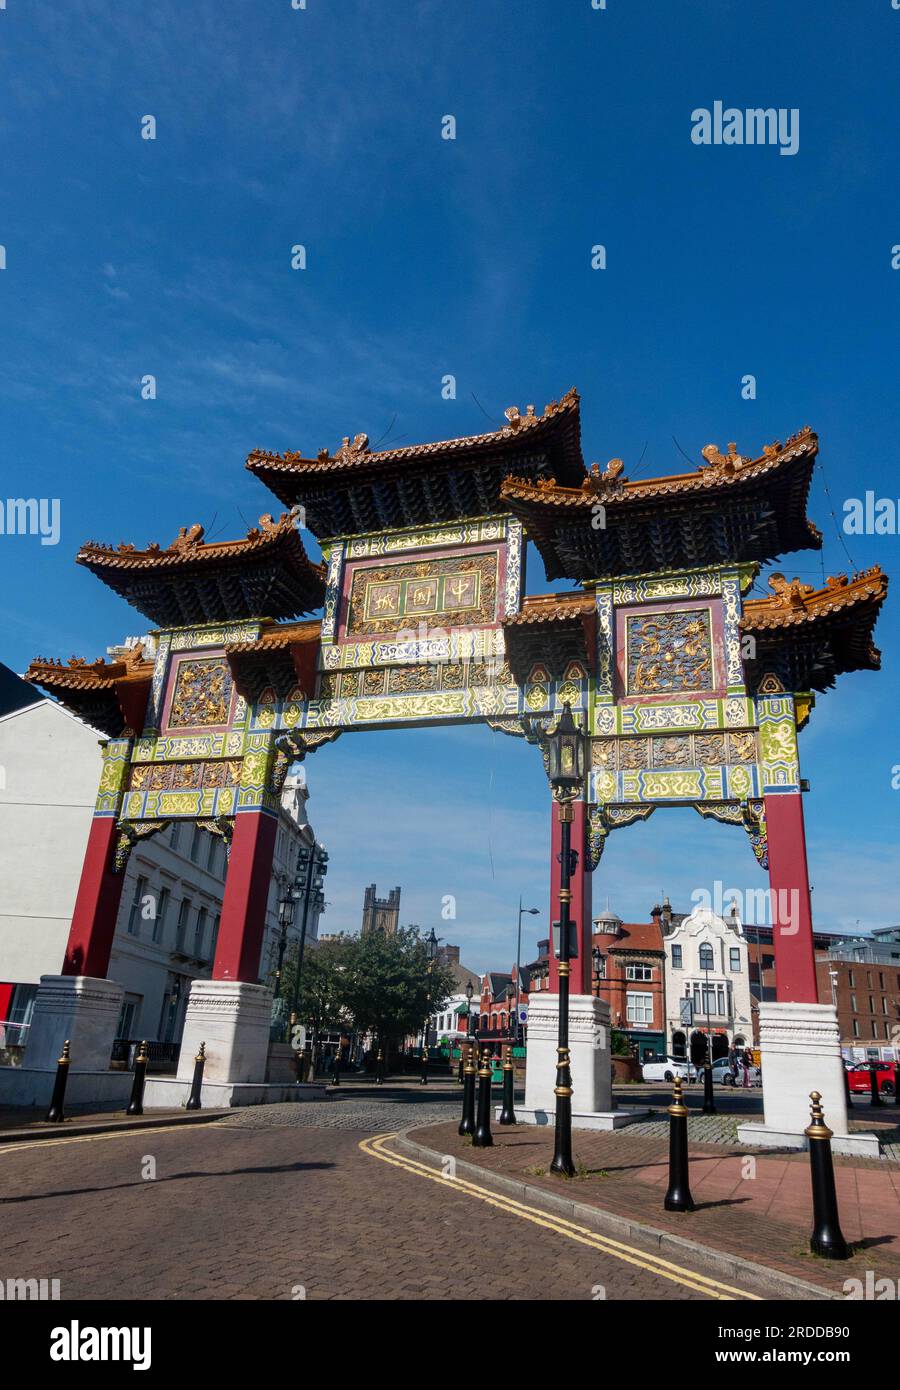 Chinese Arch in Liverpool Chinatown Stockfoto